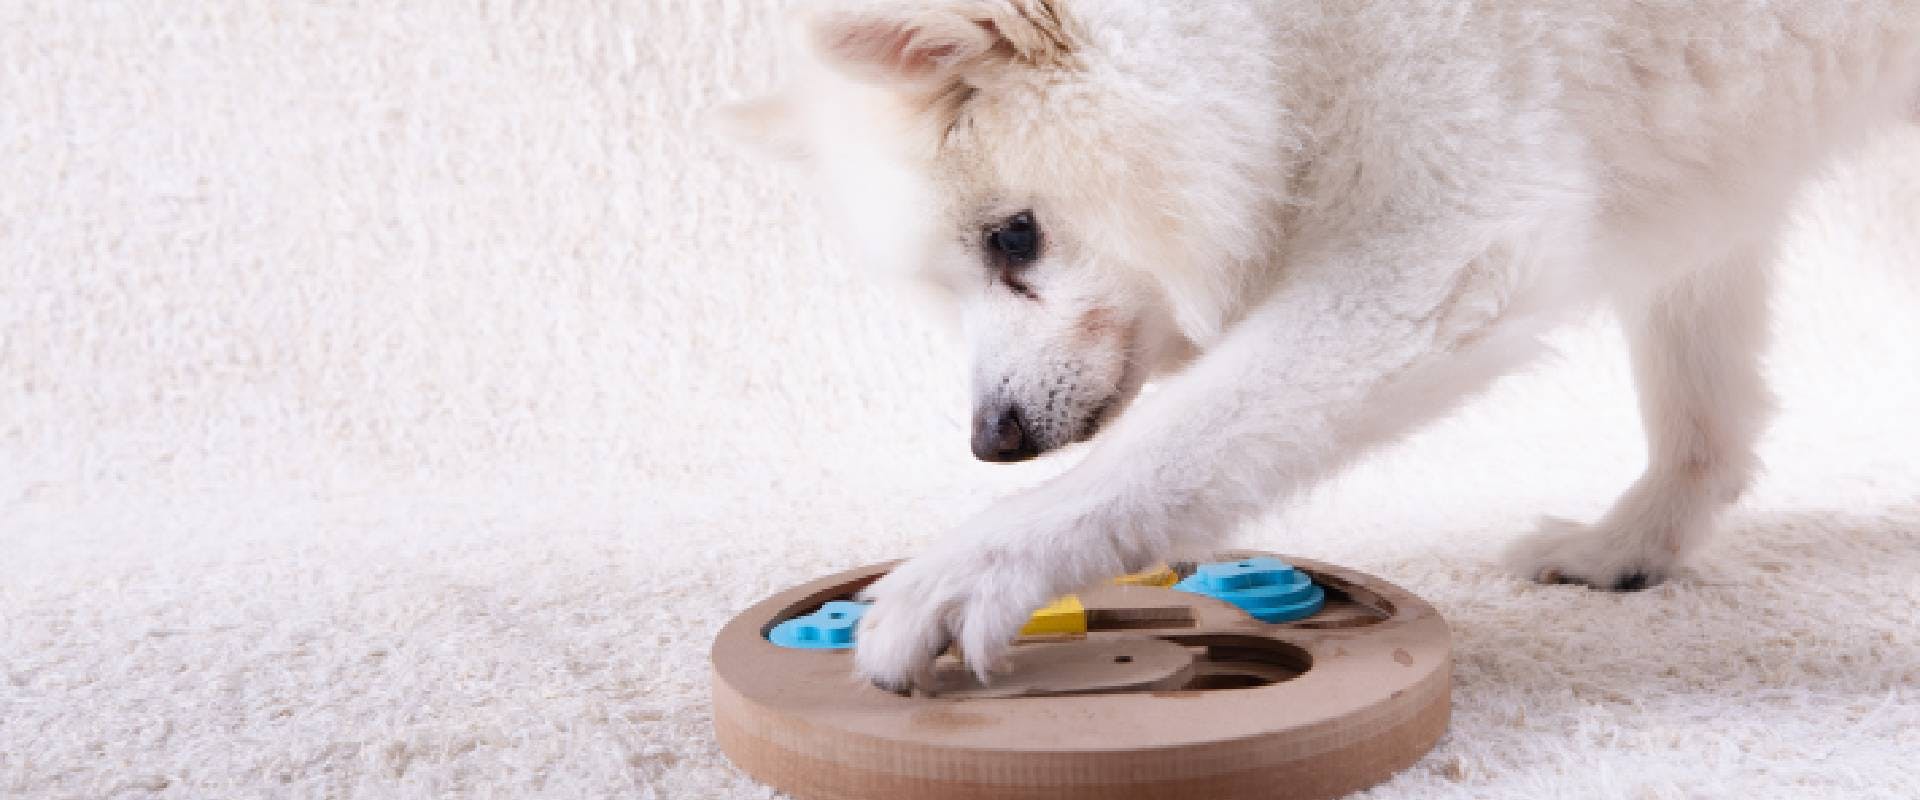 8 Interactive dog toys to keep your dog busy - Dogs Monthly